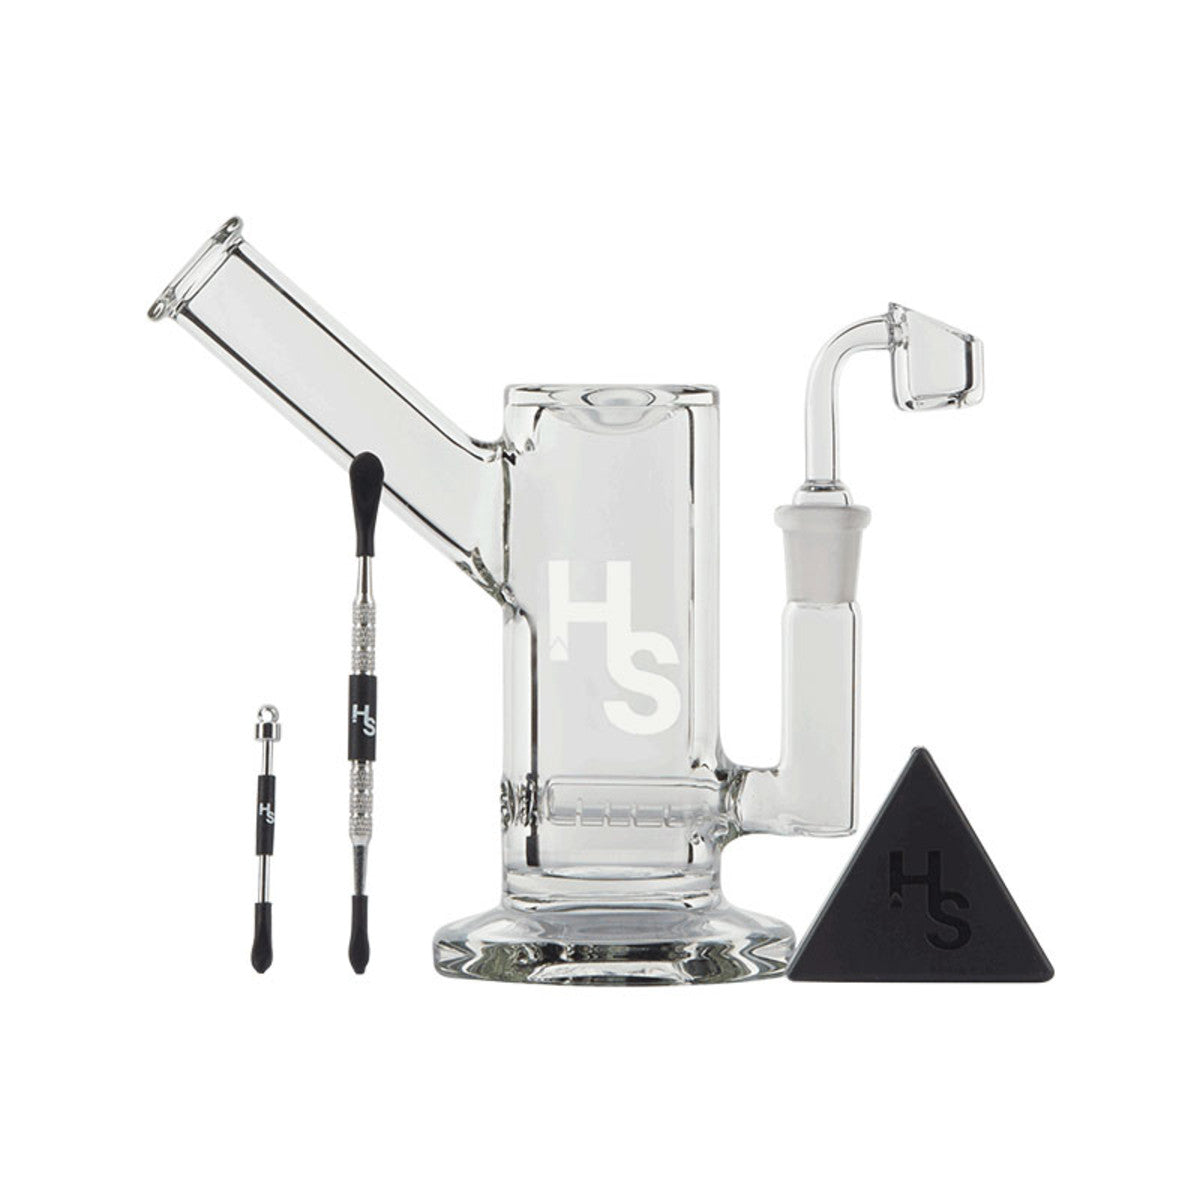 Higher Standards Heavy Duty Rig. Medical-Grade Borosilicate Glass Rig that has been Handcrafted for Powerful, Reliable Performance. Features a Quartz Banger for Optimal Flavor Transfer. MOST DIVERSE CBD CONCENTRATE COLLECTION ON THE WEB. Live Resin, Wax, Shatter &amp;MORE! Glass Rigs, Pipes. Dab, Vape, Smoke Accessories. Top Shelf CBD Hemp Flower. - Sauce Warehouse